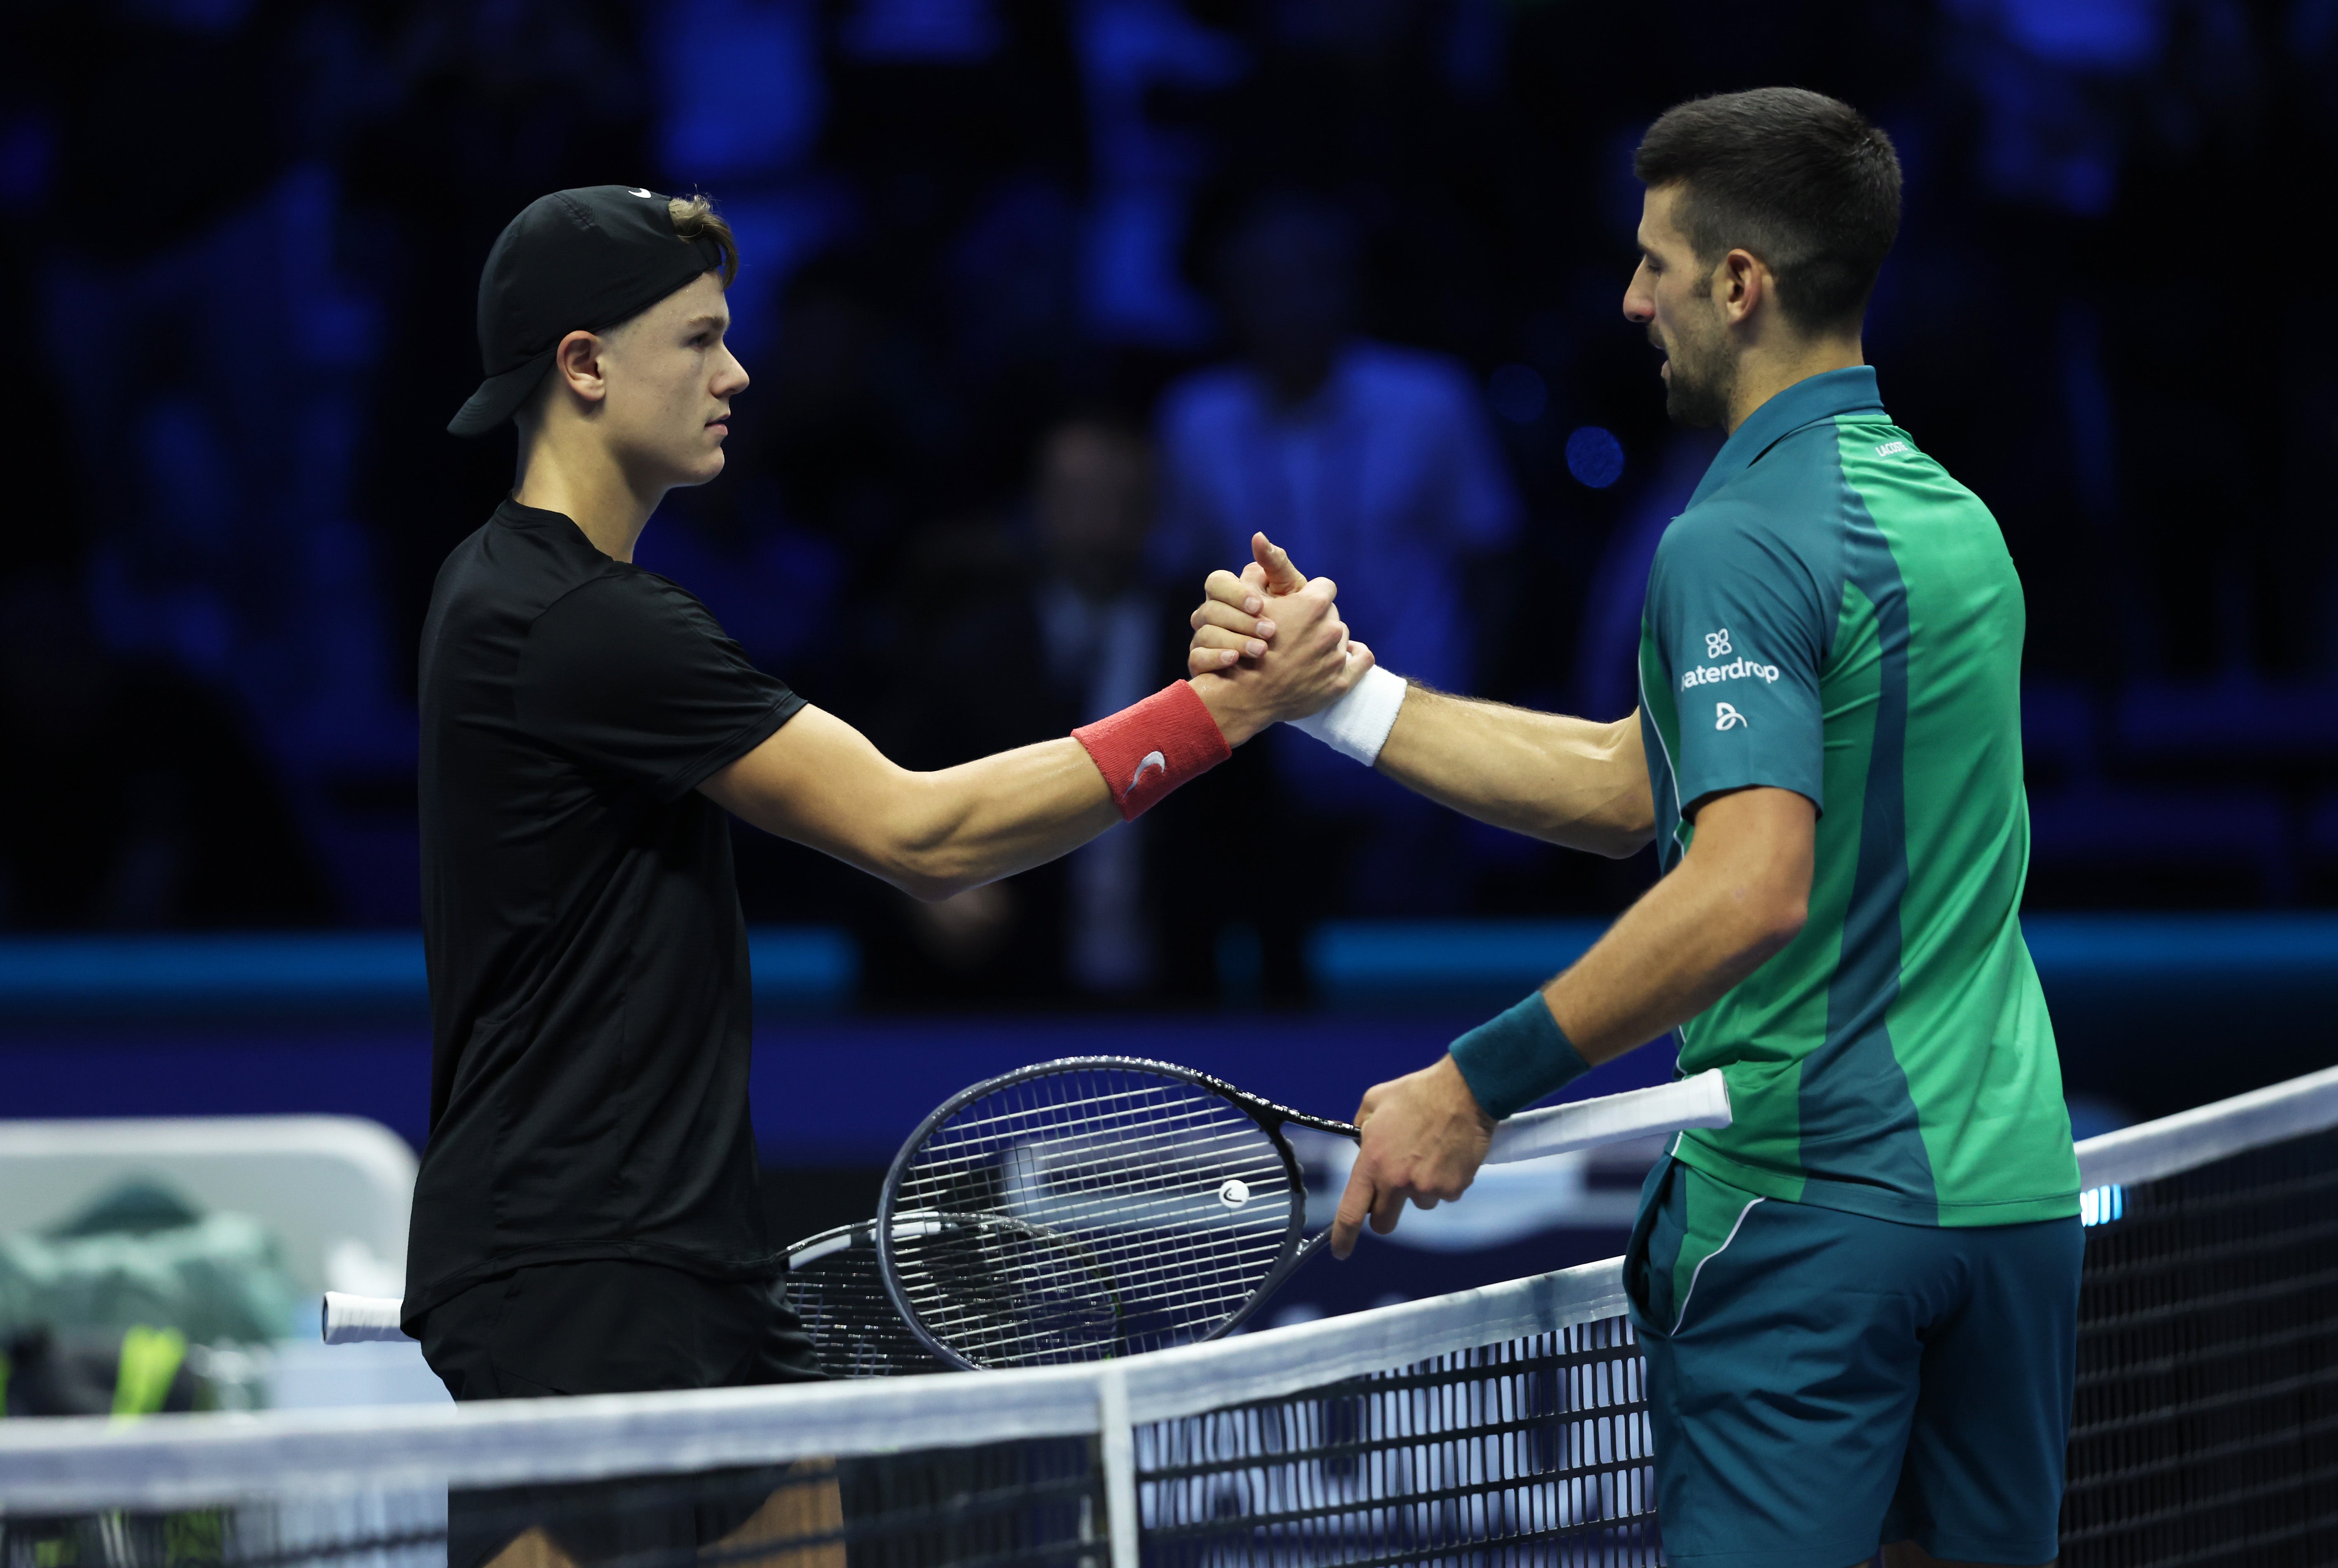 Djokovic defeated Rune in three sets to confirm his year-end world No 1 ranking